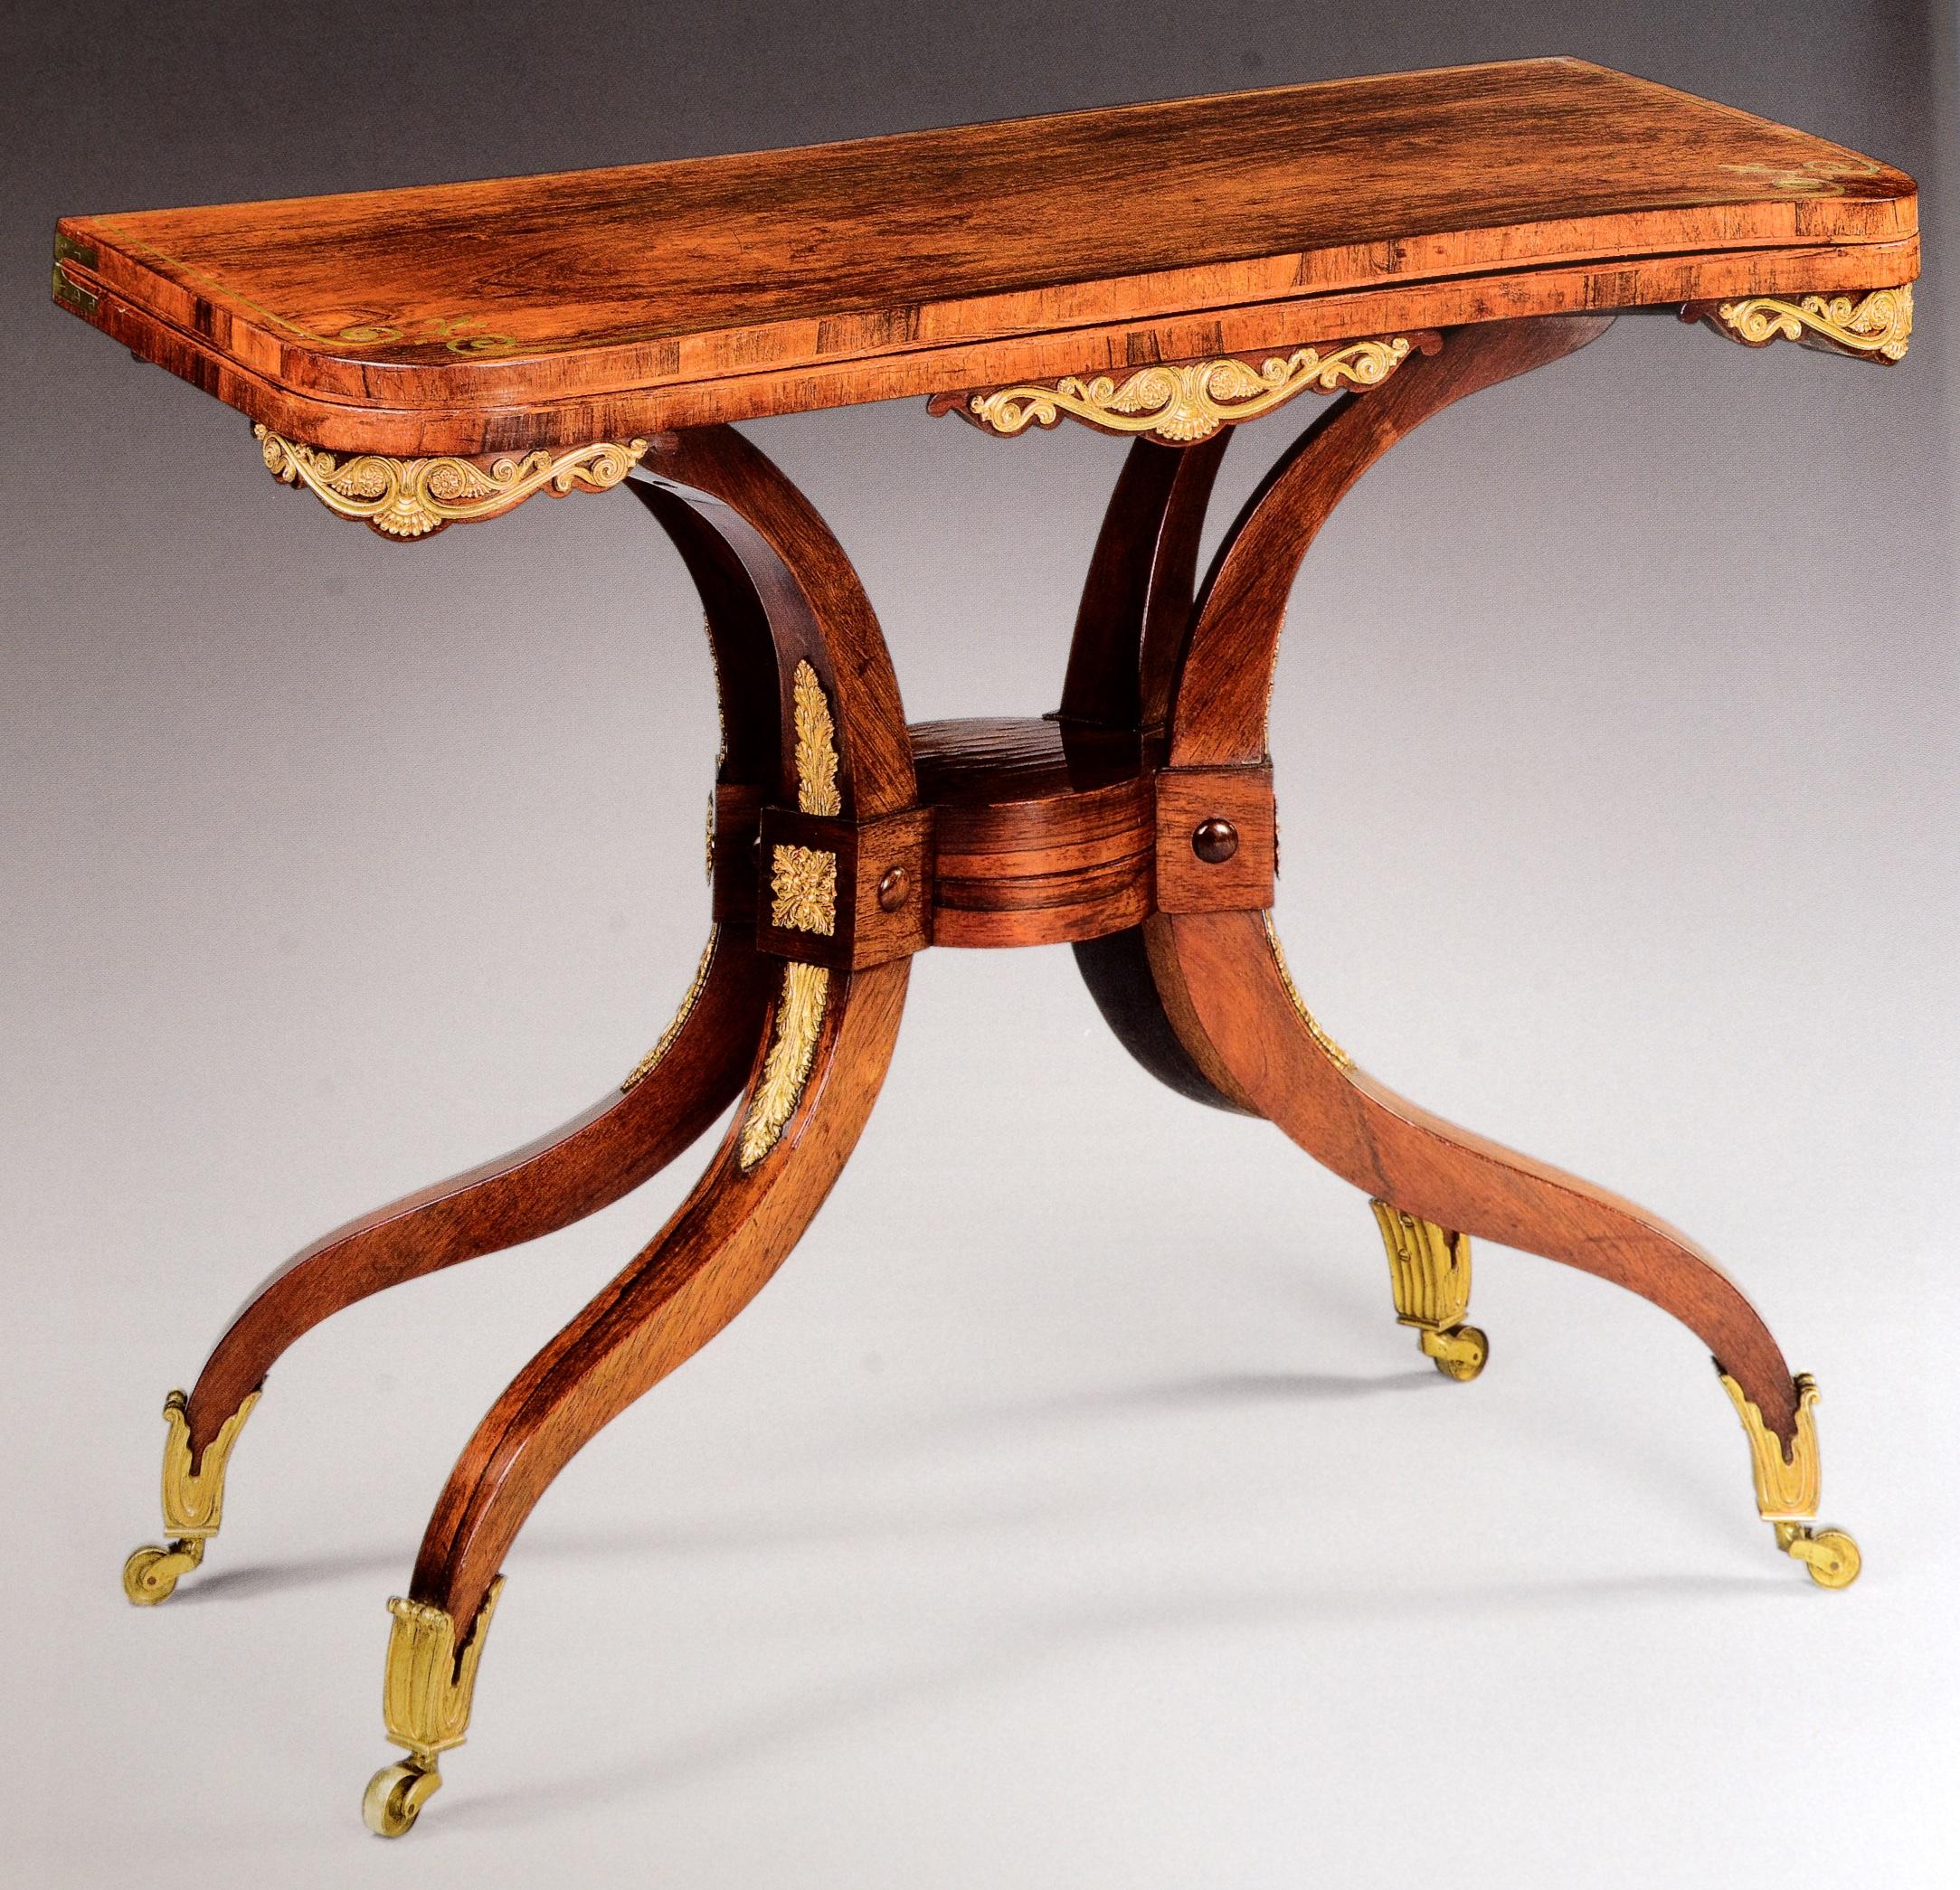 Exceptional Furniture & Works of Art by Mallett & Son Antiques, First Edition For Sale 2